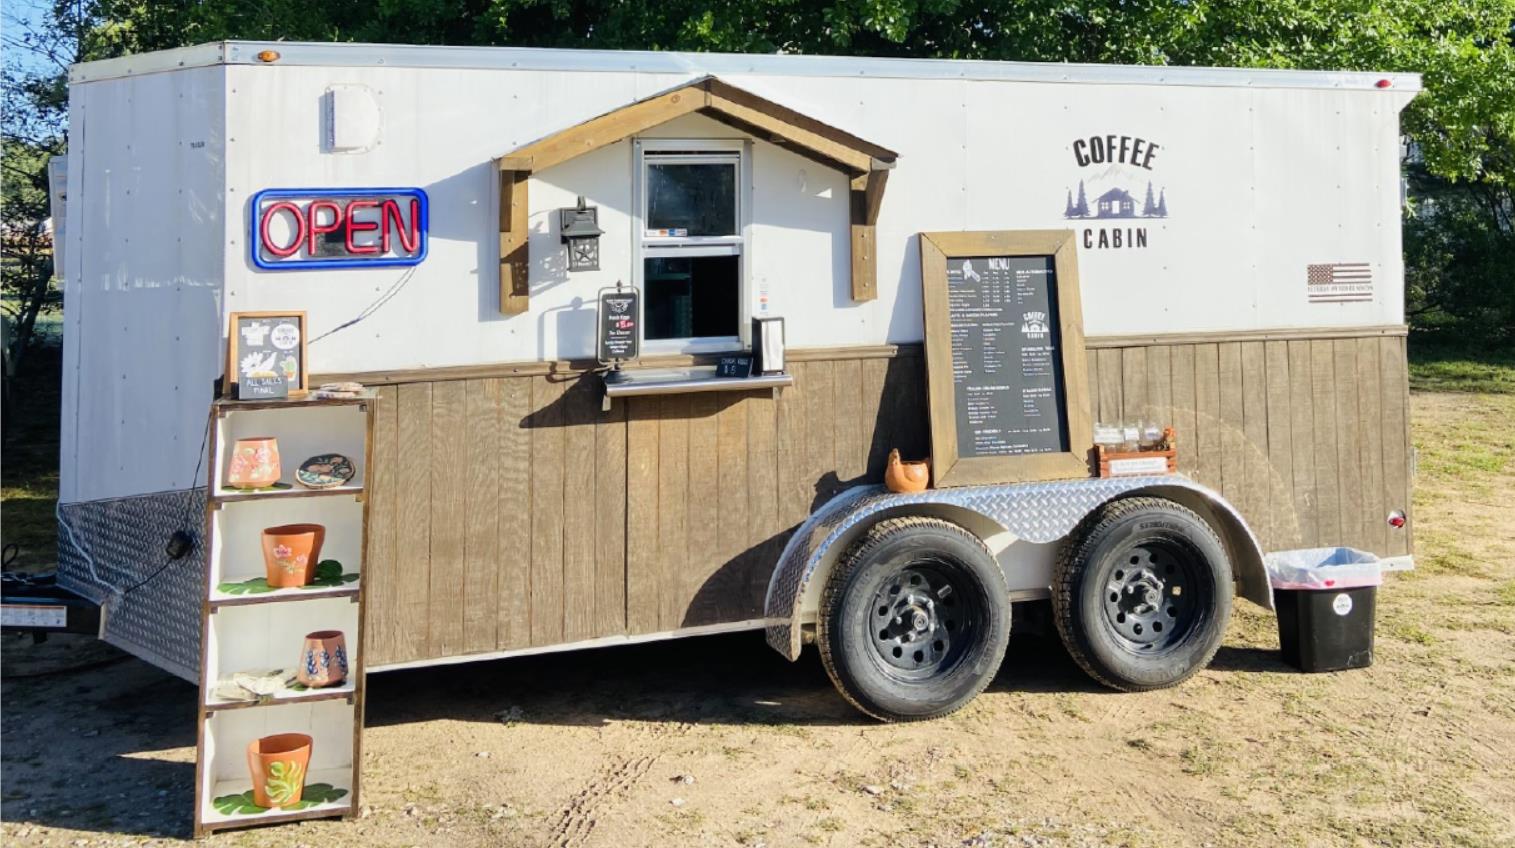 Photo of stolen trailer. Trailer is pictured with Coffee Cabin logo on the front, a menu, and an OPEN neon sign with touches of cabin trimmings. 